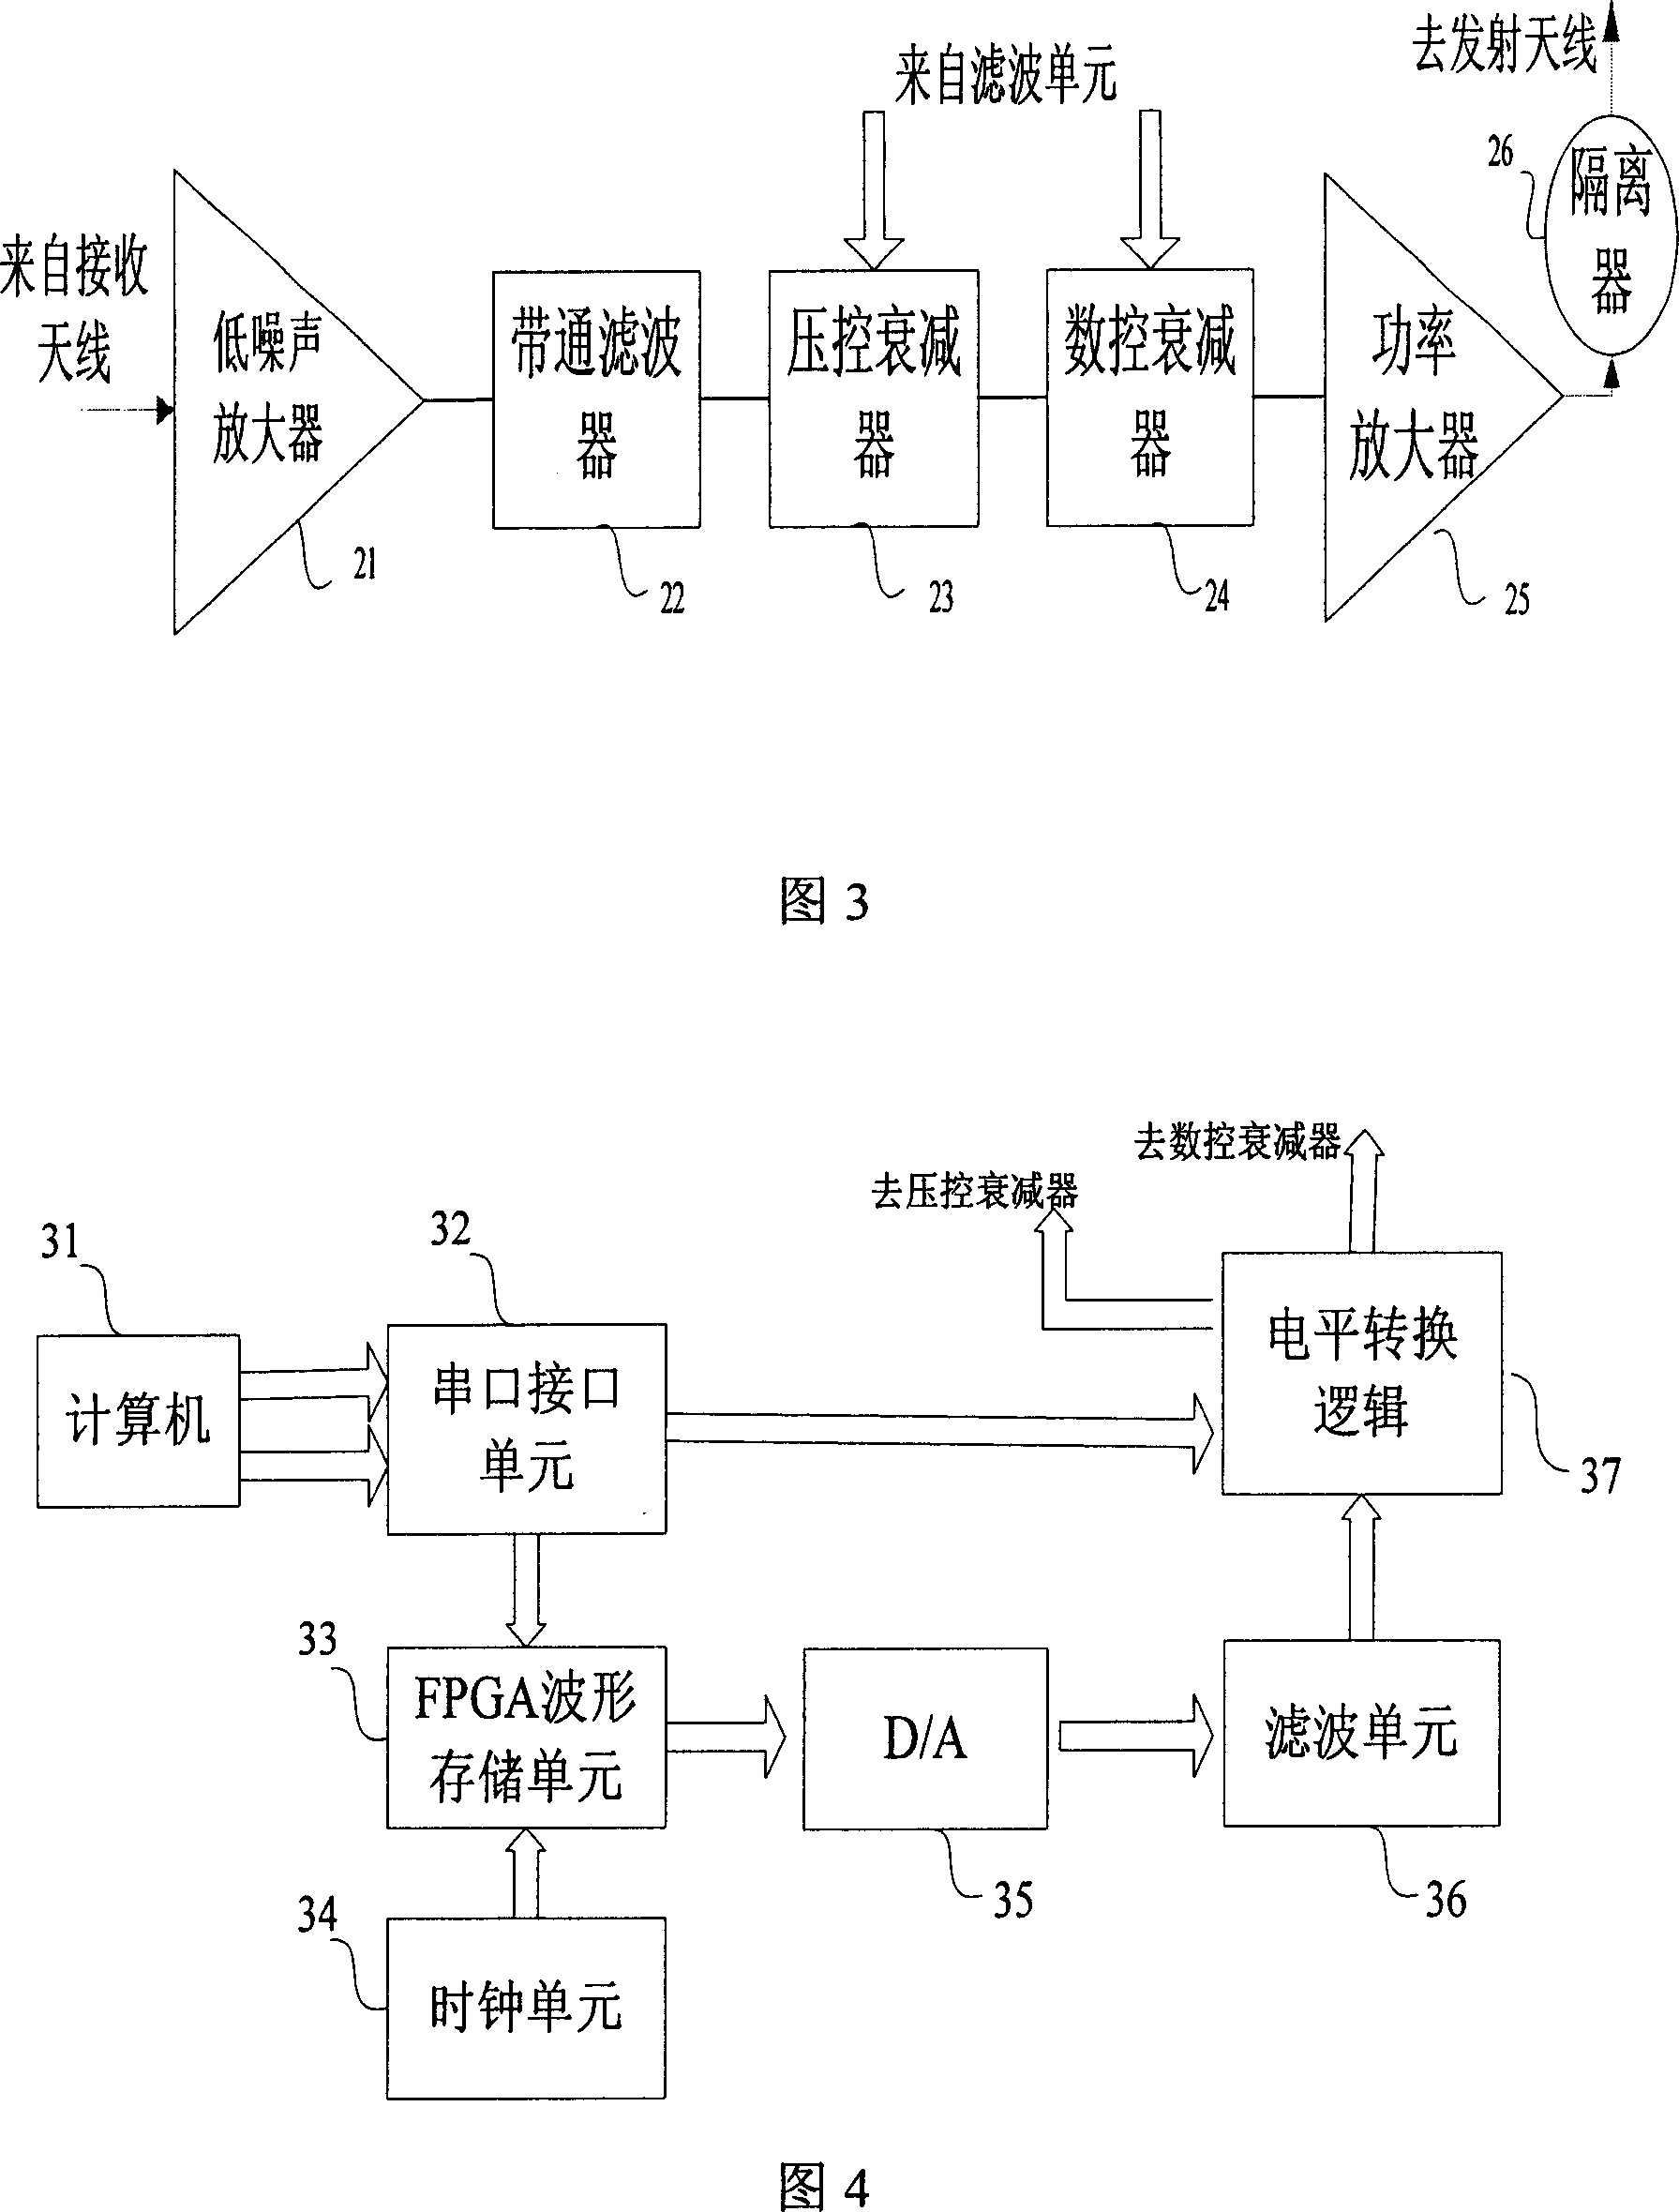 Active externally coefficient potentiometer and scaling method of wideband synthetic aperture radar